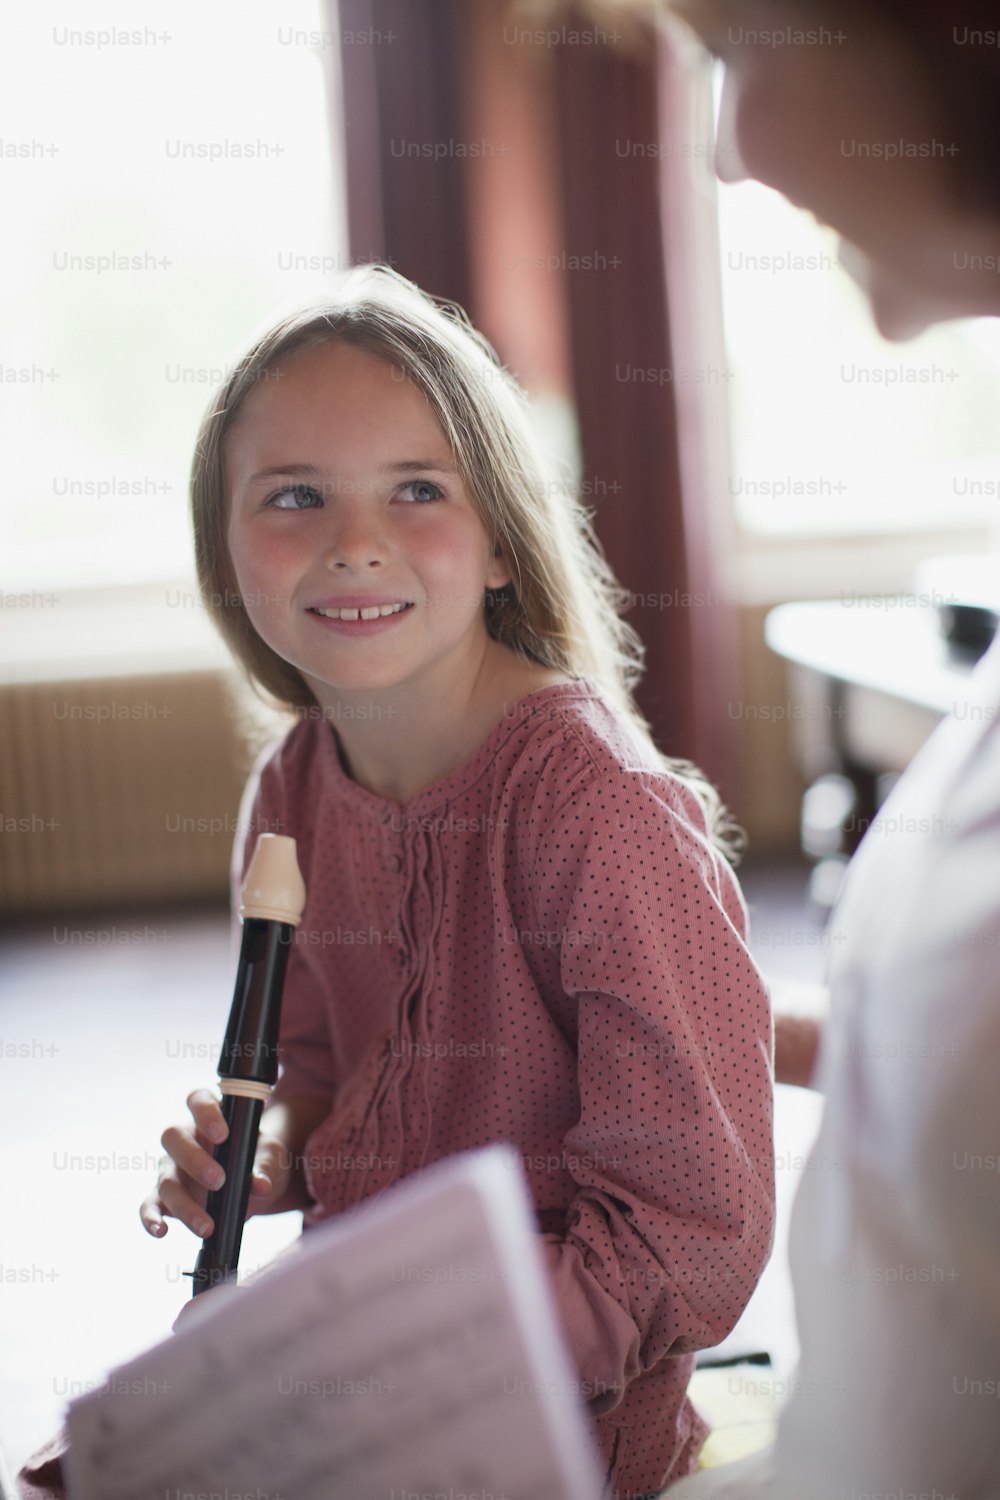 a little girl is holding a microphone and smiling